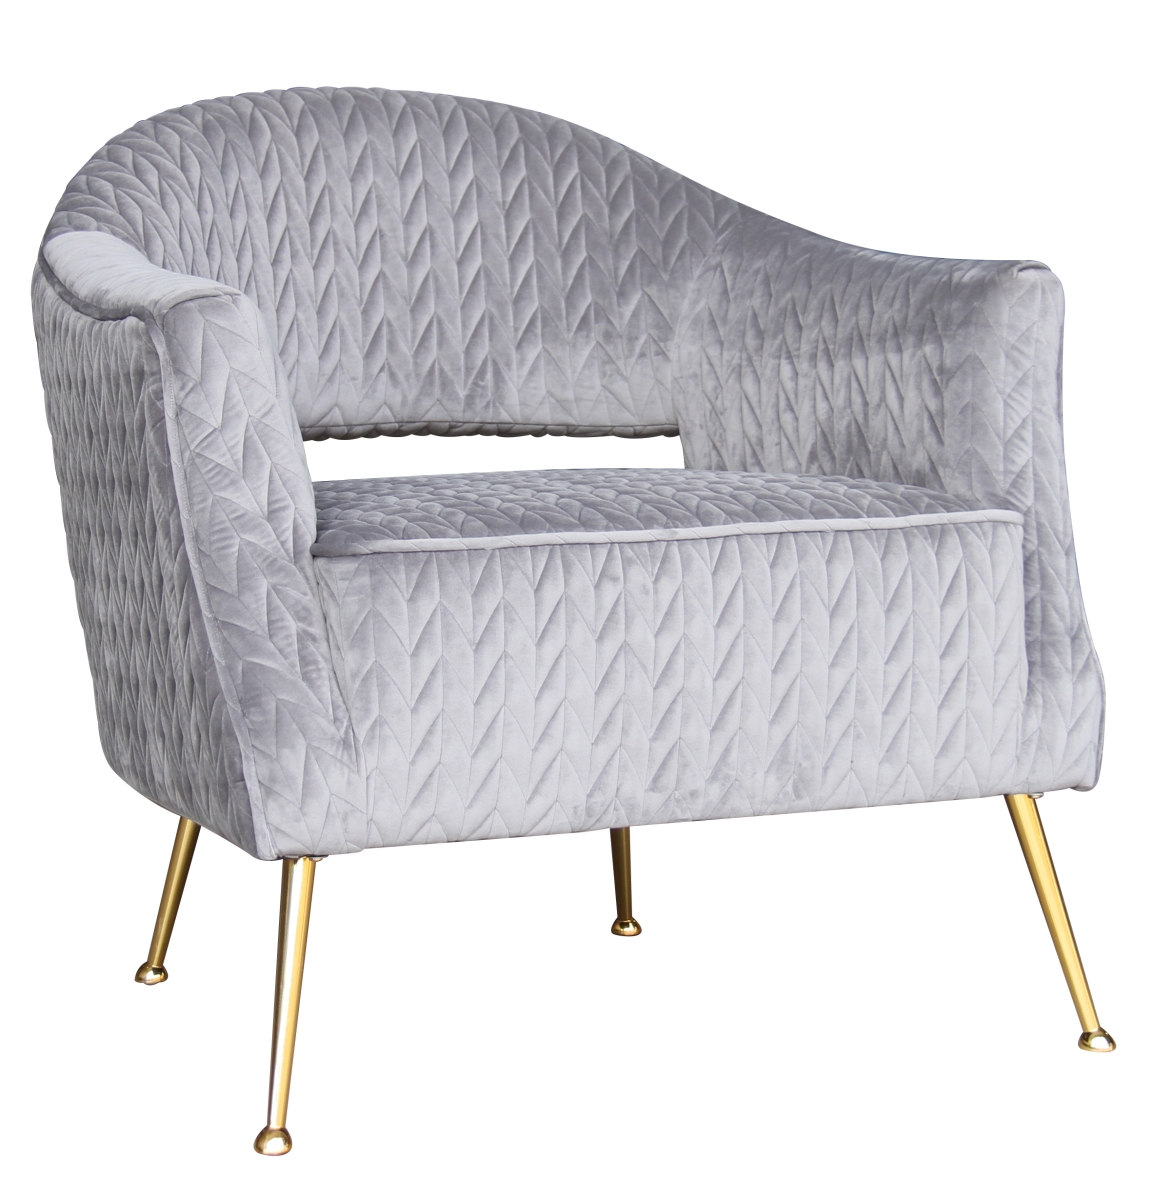 Pzw-769 Noho Lafayette Accent Chair - Silver